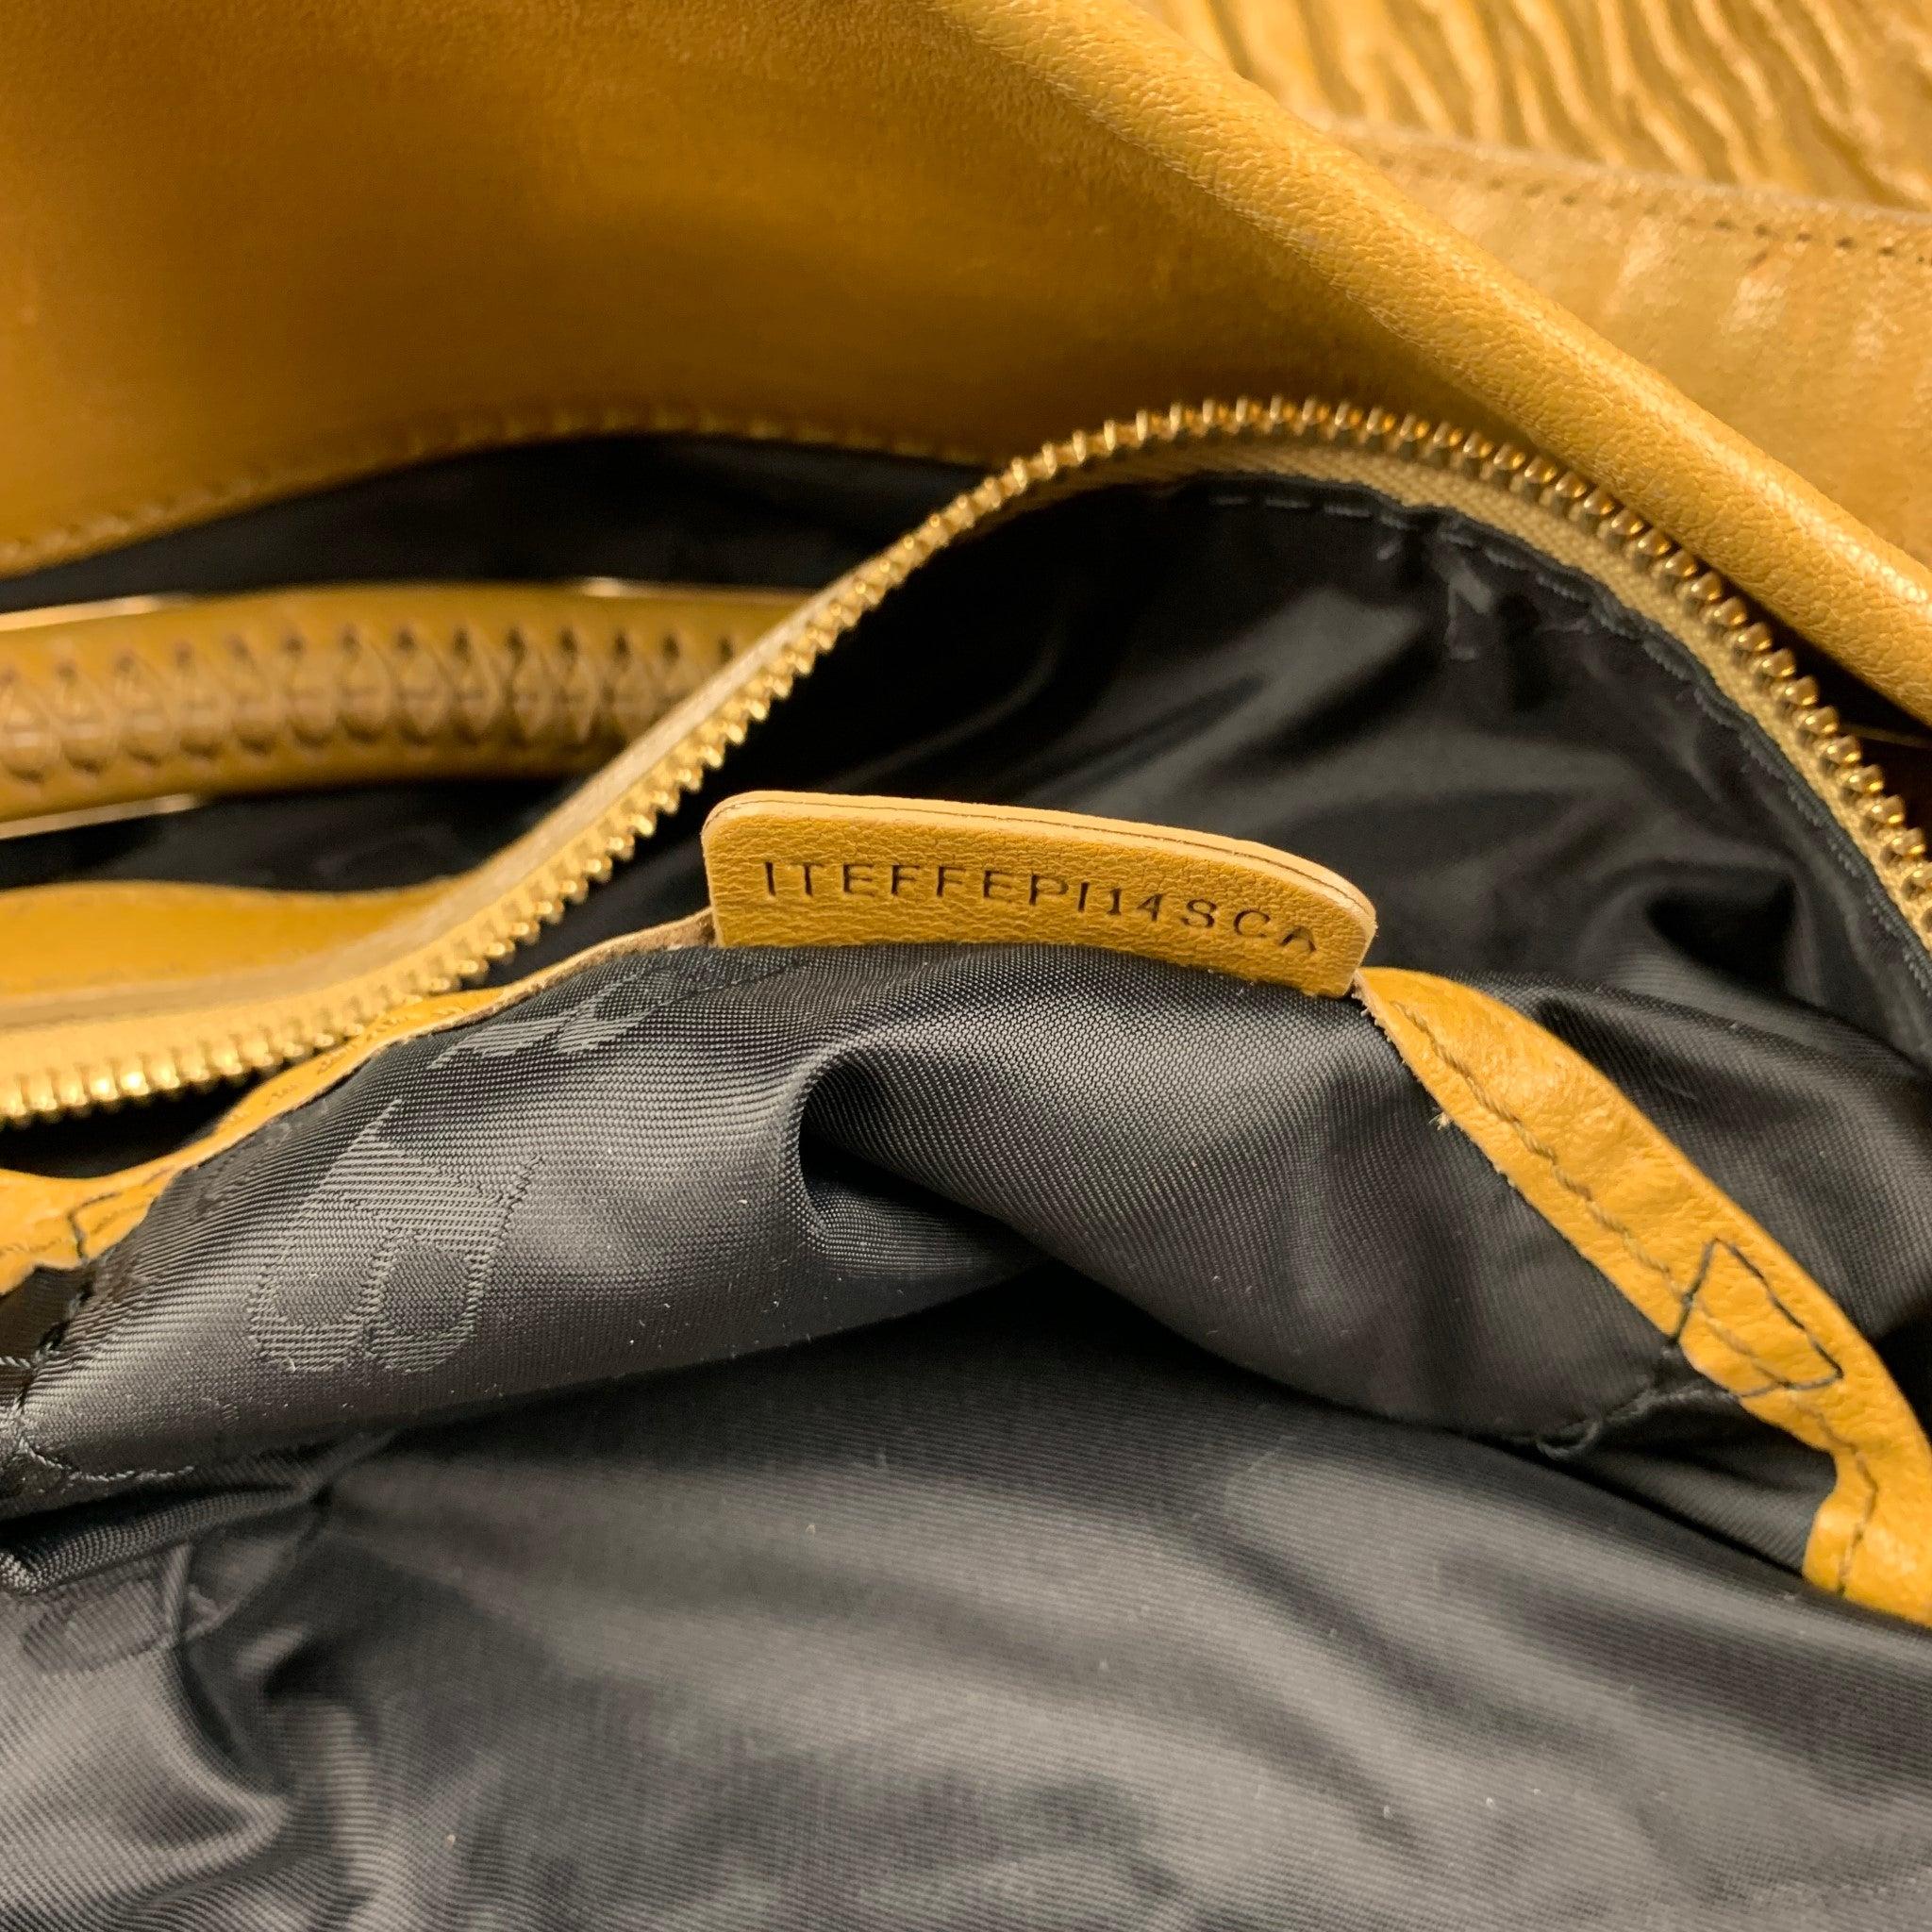 BURBERRY PRORSUM Mustard Ruched Leather Tote Handbag For Sale 3